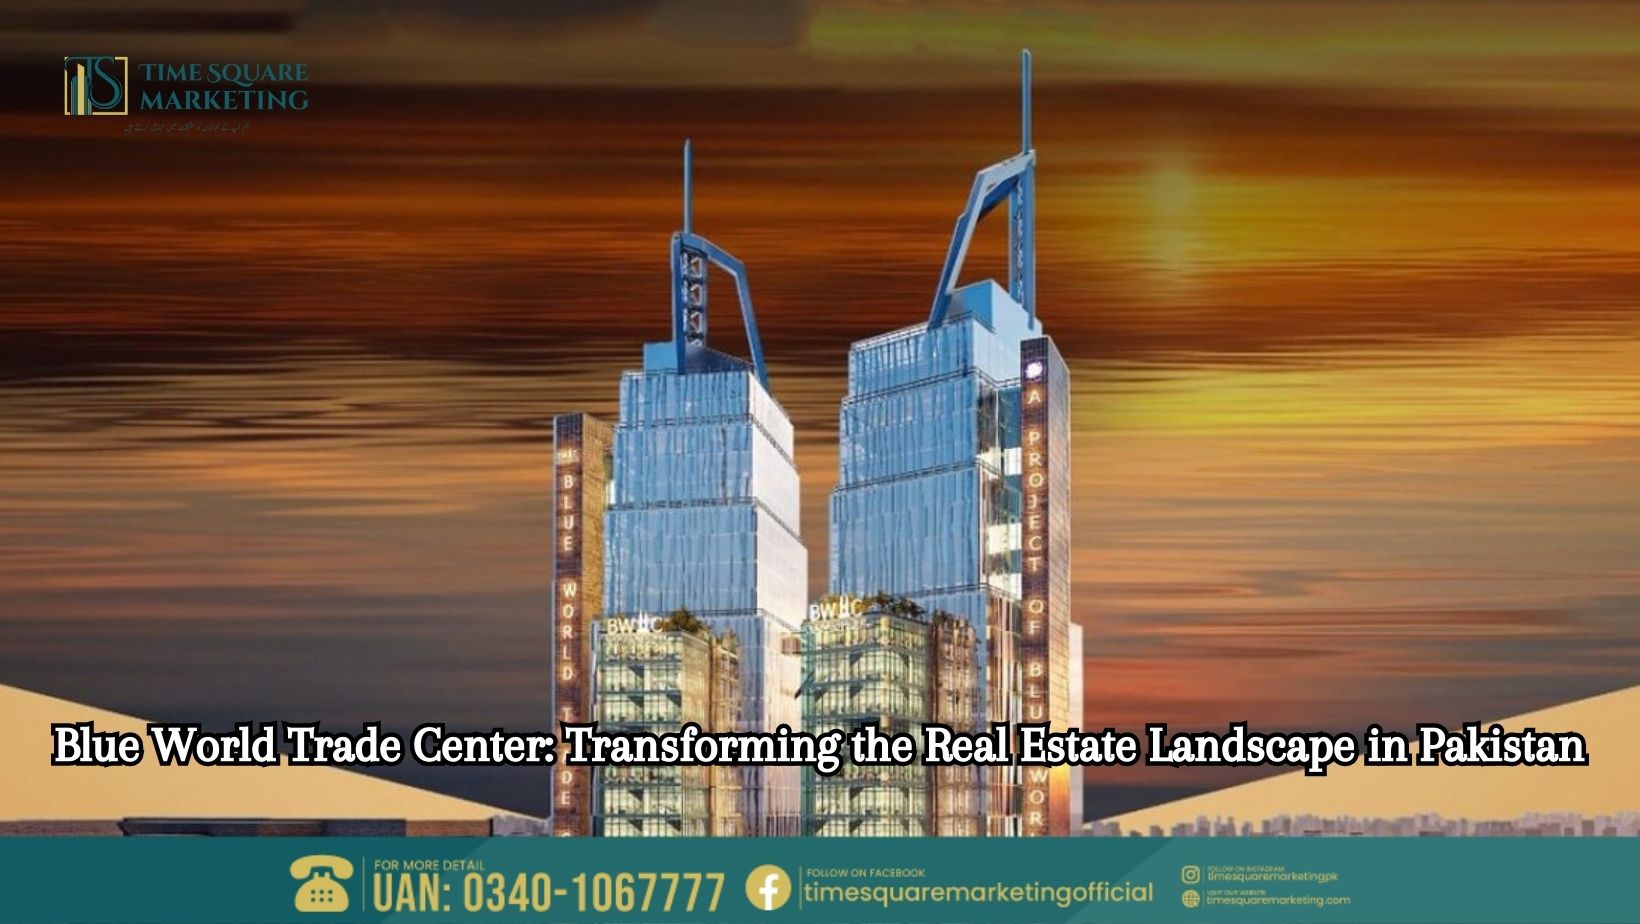 Blue World Trade Center Transforming the Real Estate Landscape in Pakistan